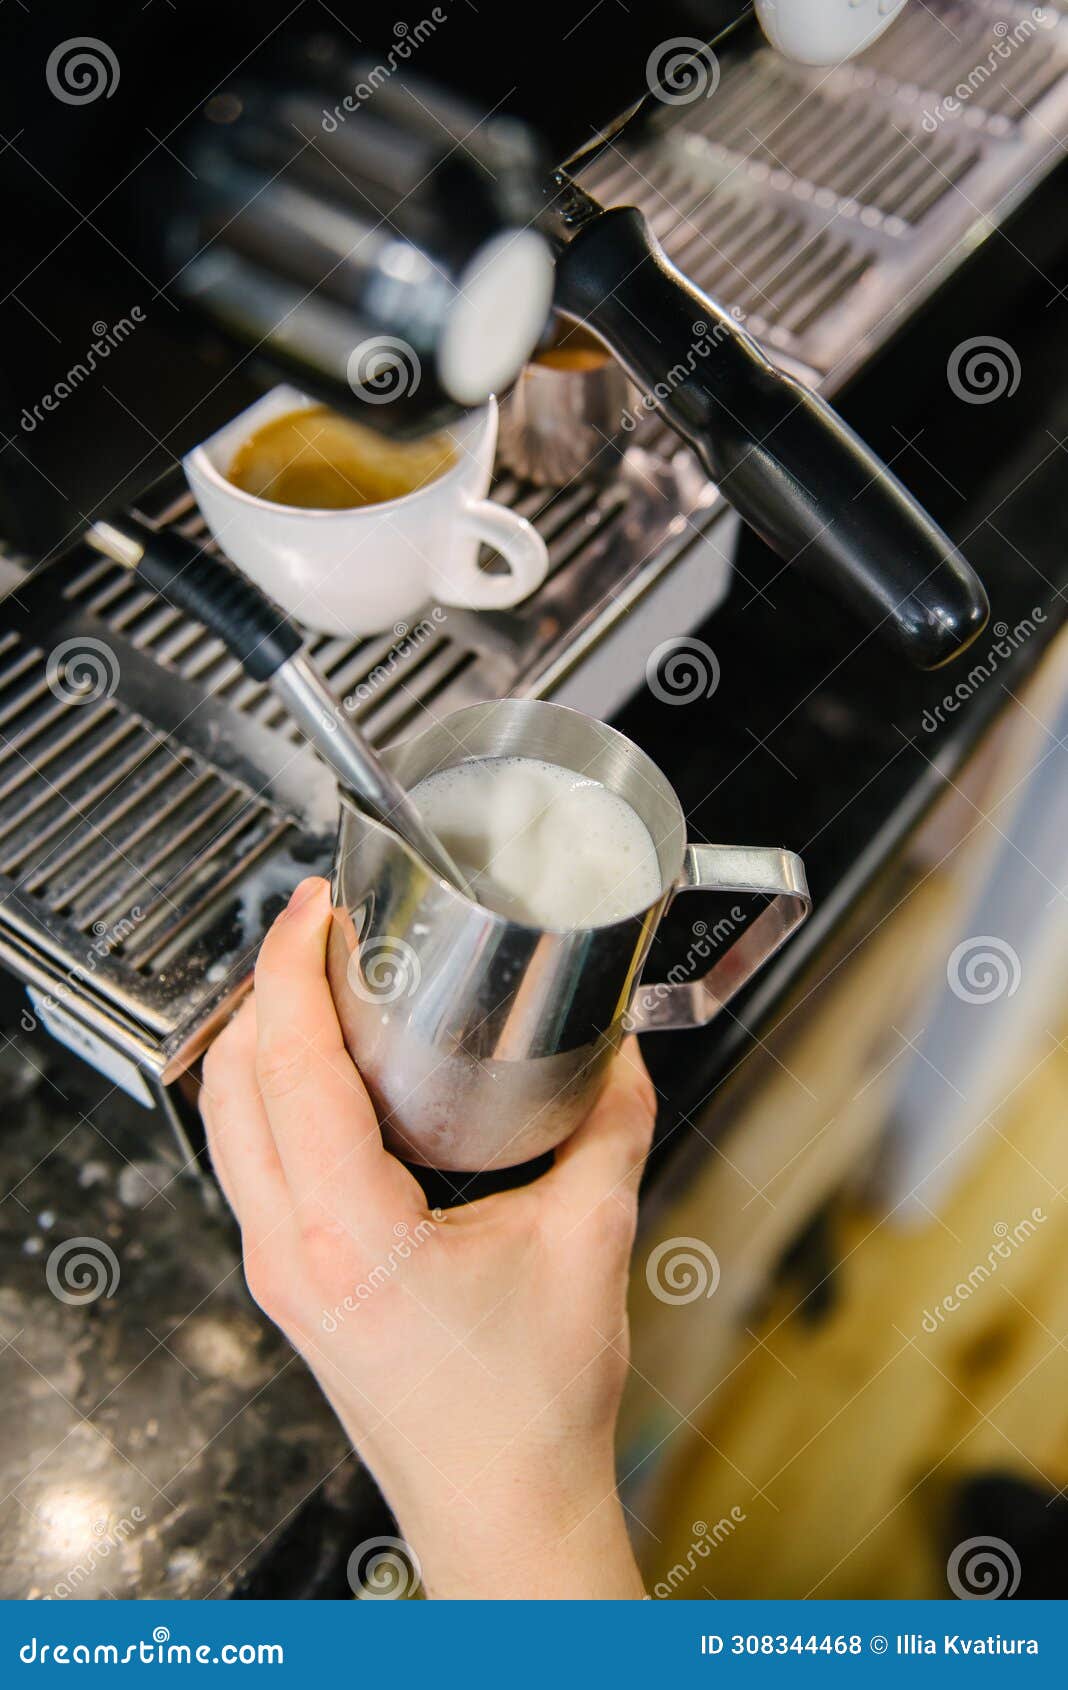 barista froths milk for coffee. there is a cup of freshly brewed coffee in the coffee machine